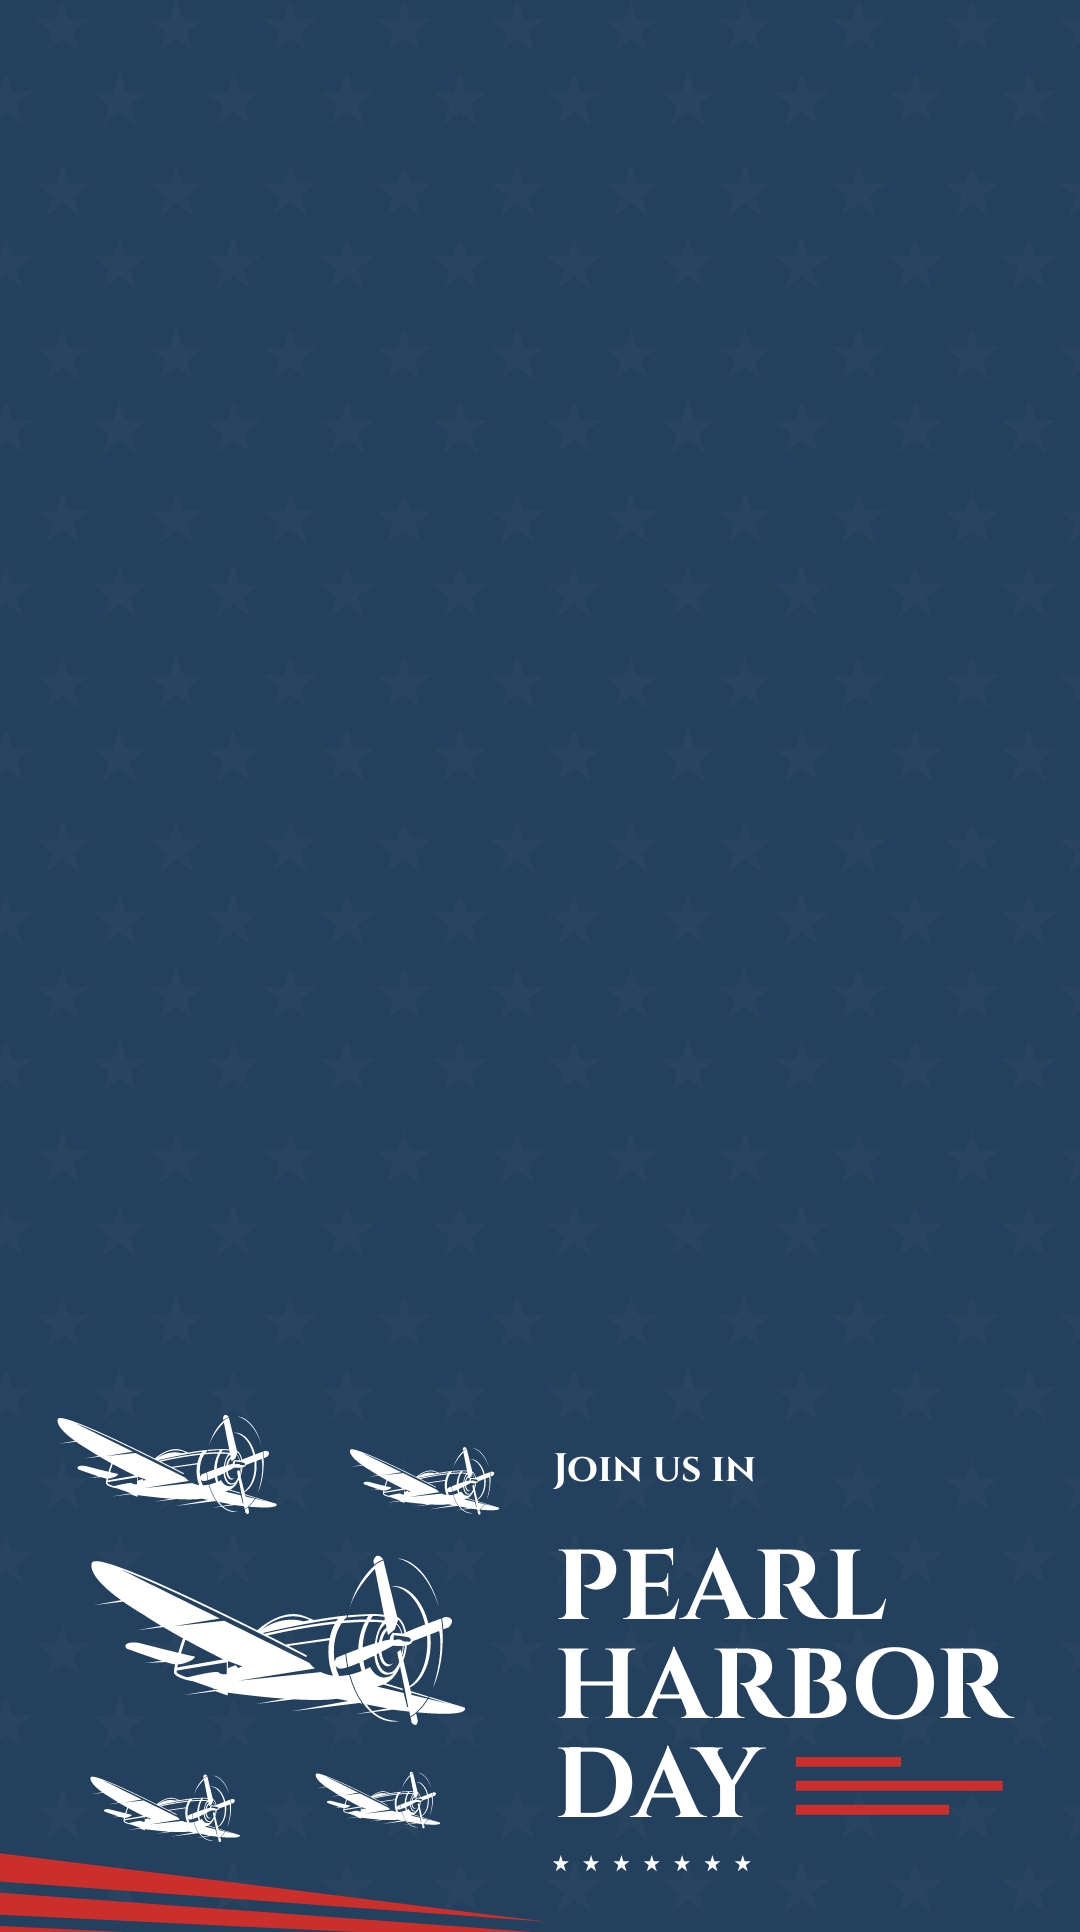 Pearl Harbor Day Event Snapchat Geofilter